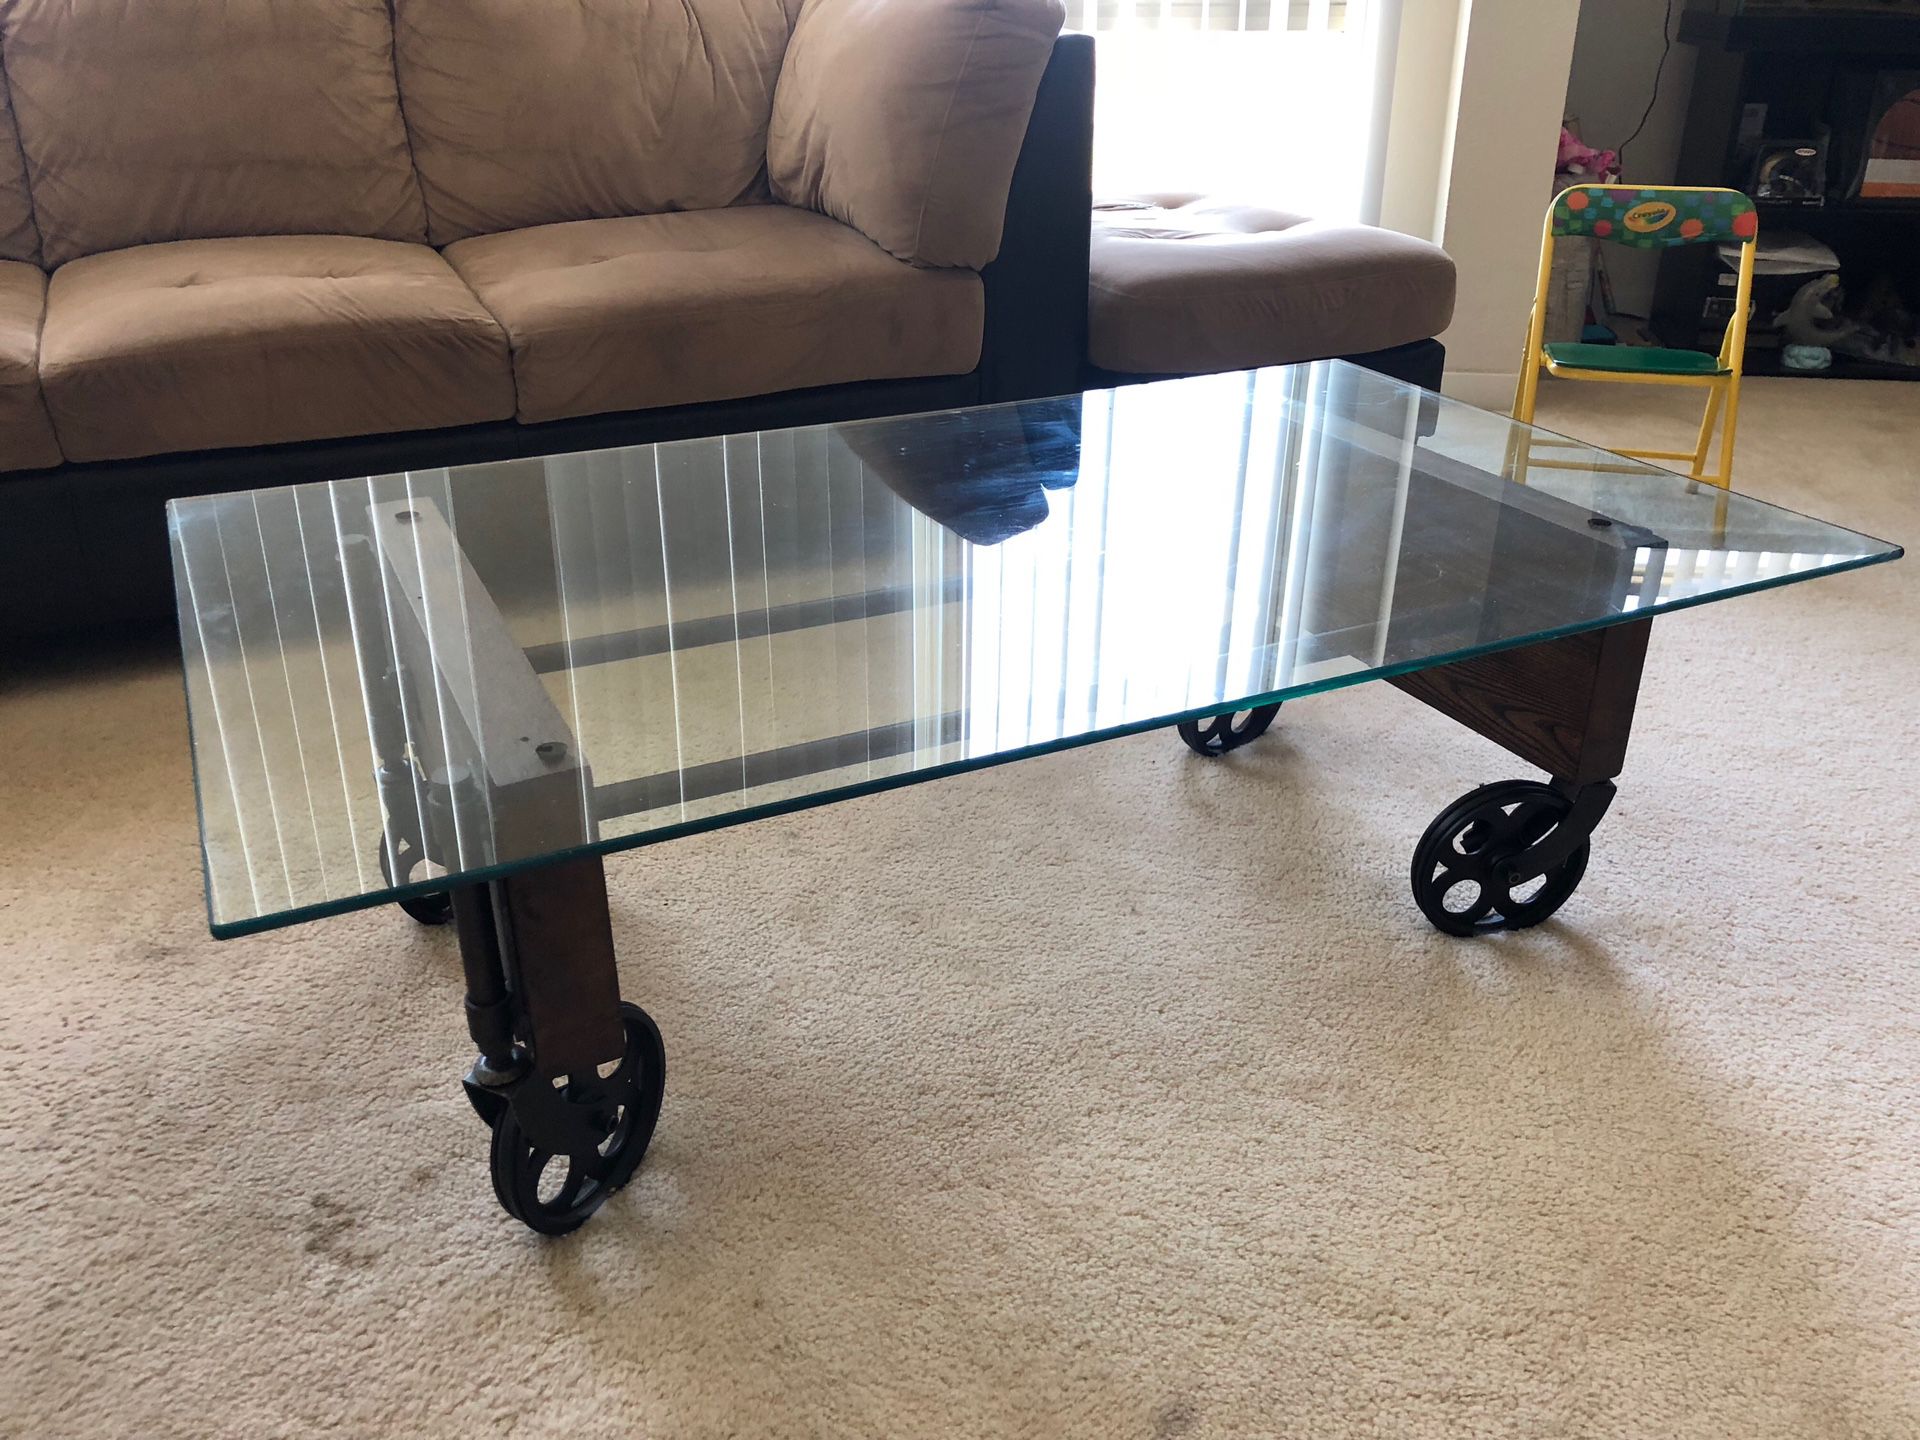 Couch and coffee table can purchase separately or together